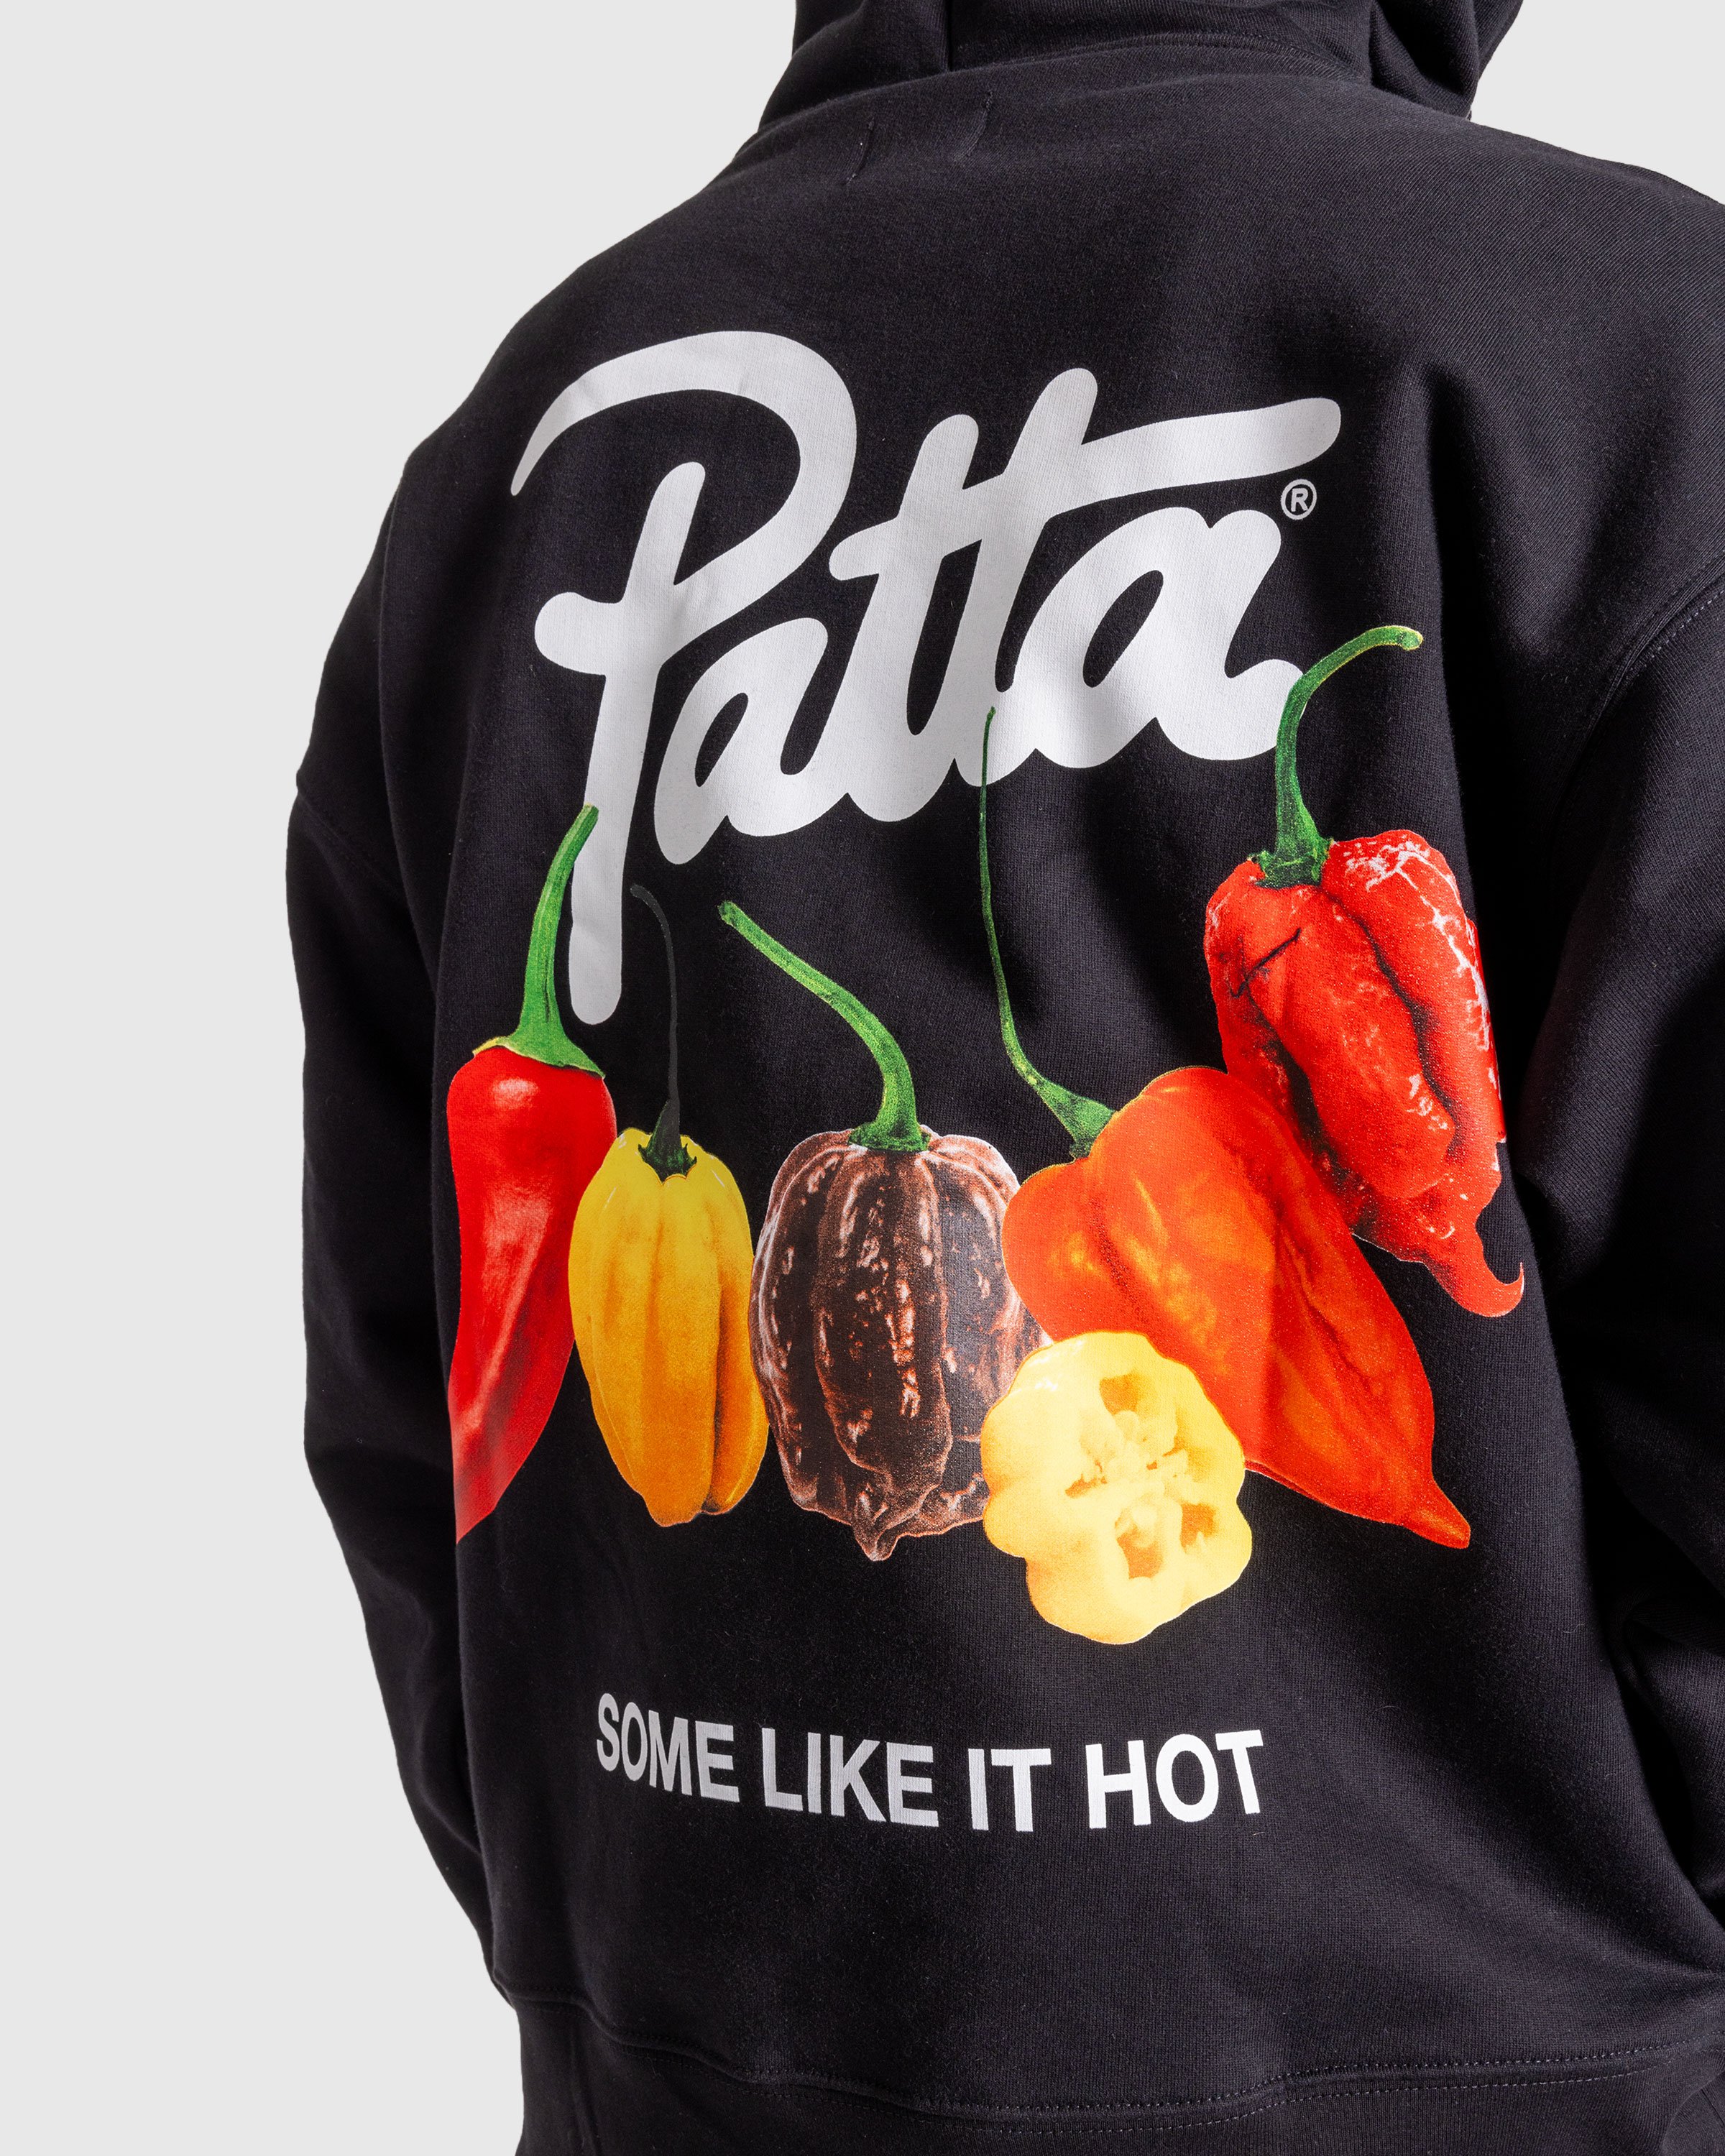 Patta - Some Like It Hot Classic Hooded Sweater Black - Clothing - Black - Image 5